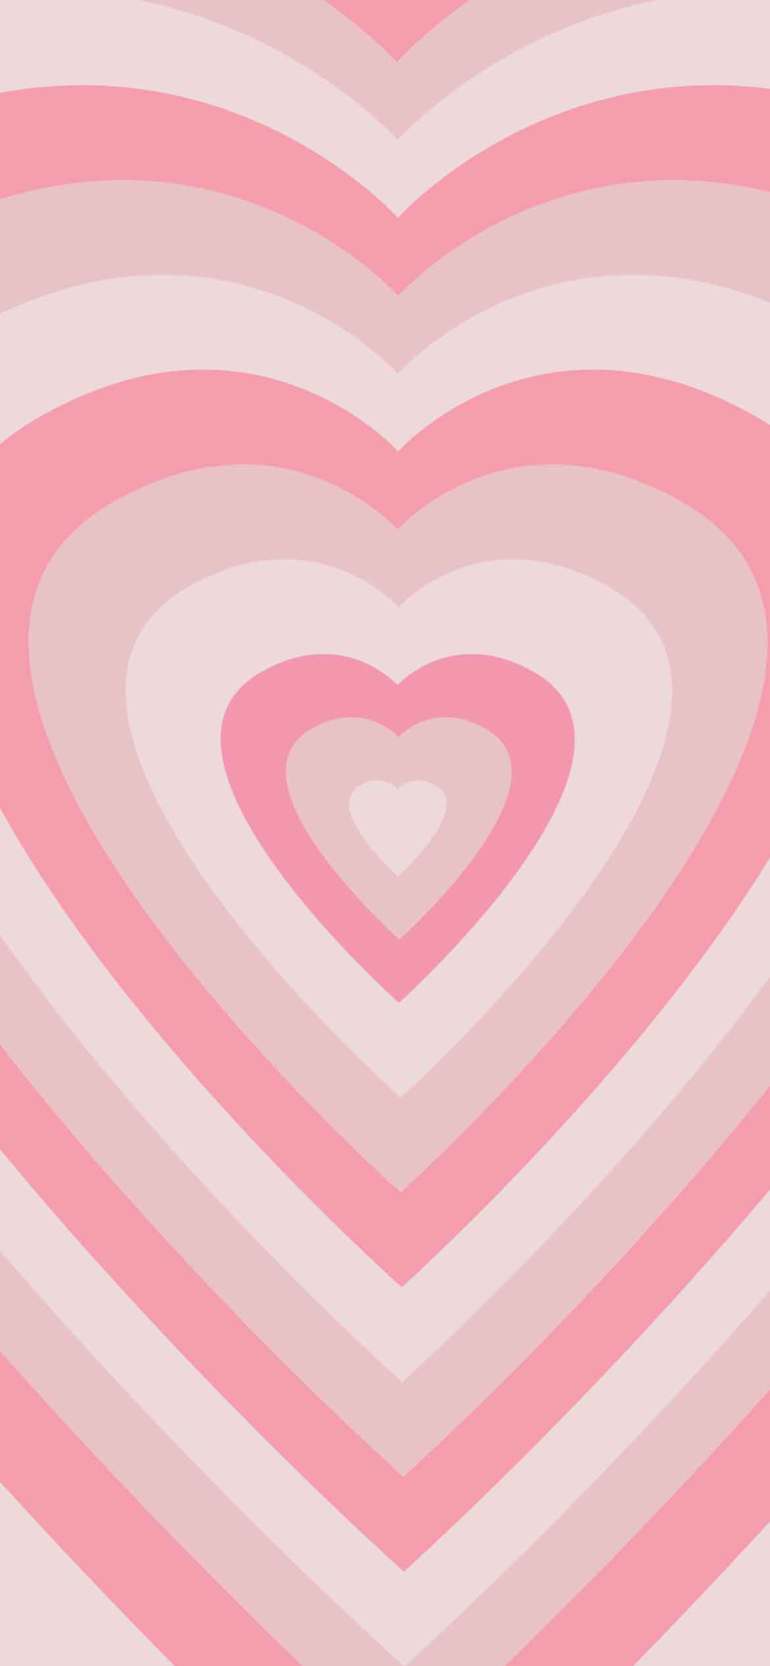  Rosa Hintergrundbild 770x1666. Pink Aesthetic Picture : Layered Heart Shapes Wallpaper for Phone Wallpaper